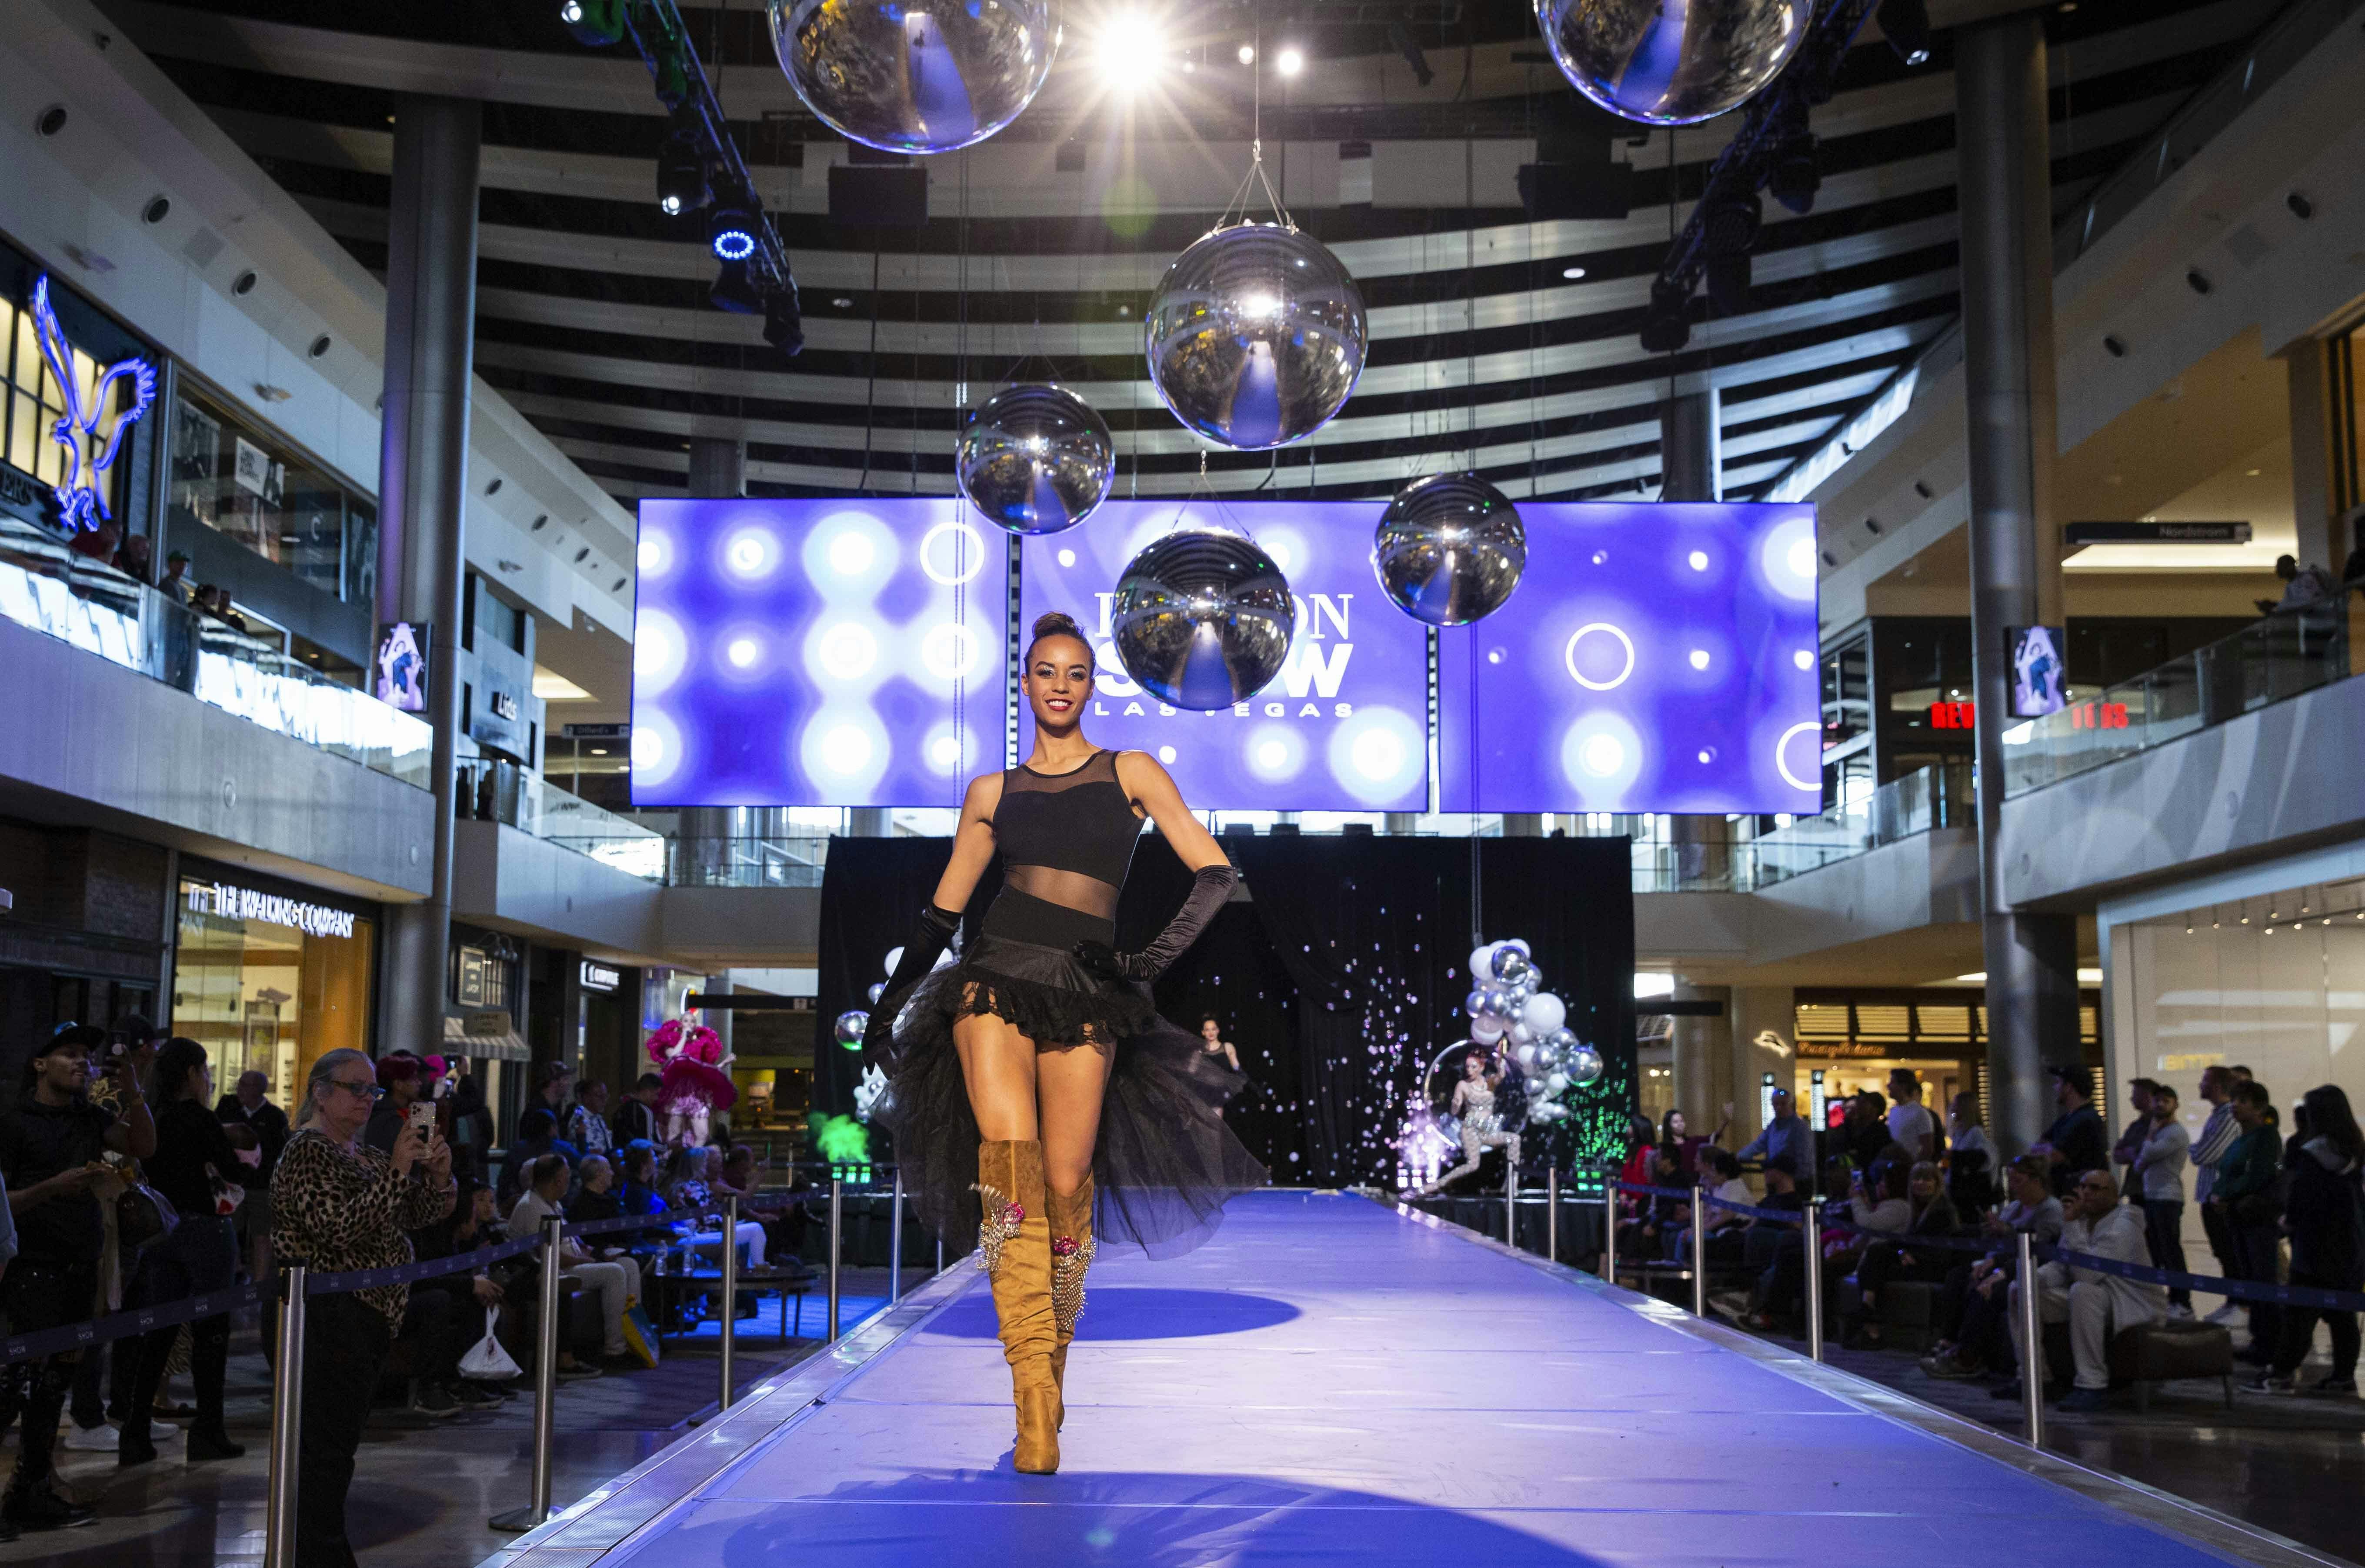 Fashion Show in Las Vegas - Catch Weekly Runway Shows at this Chic